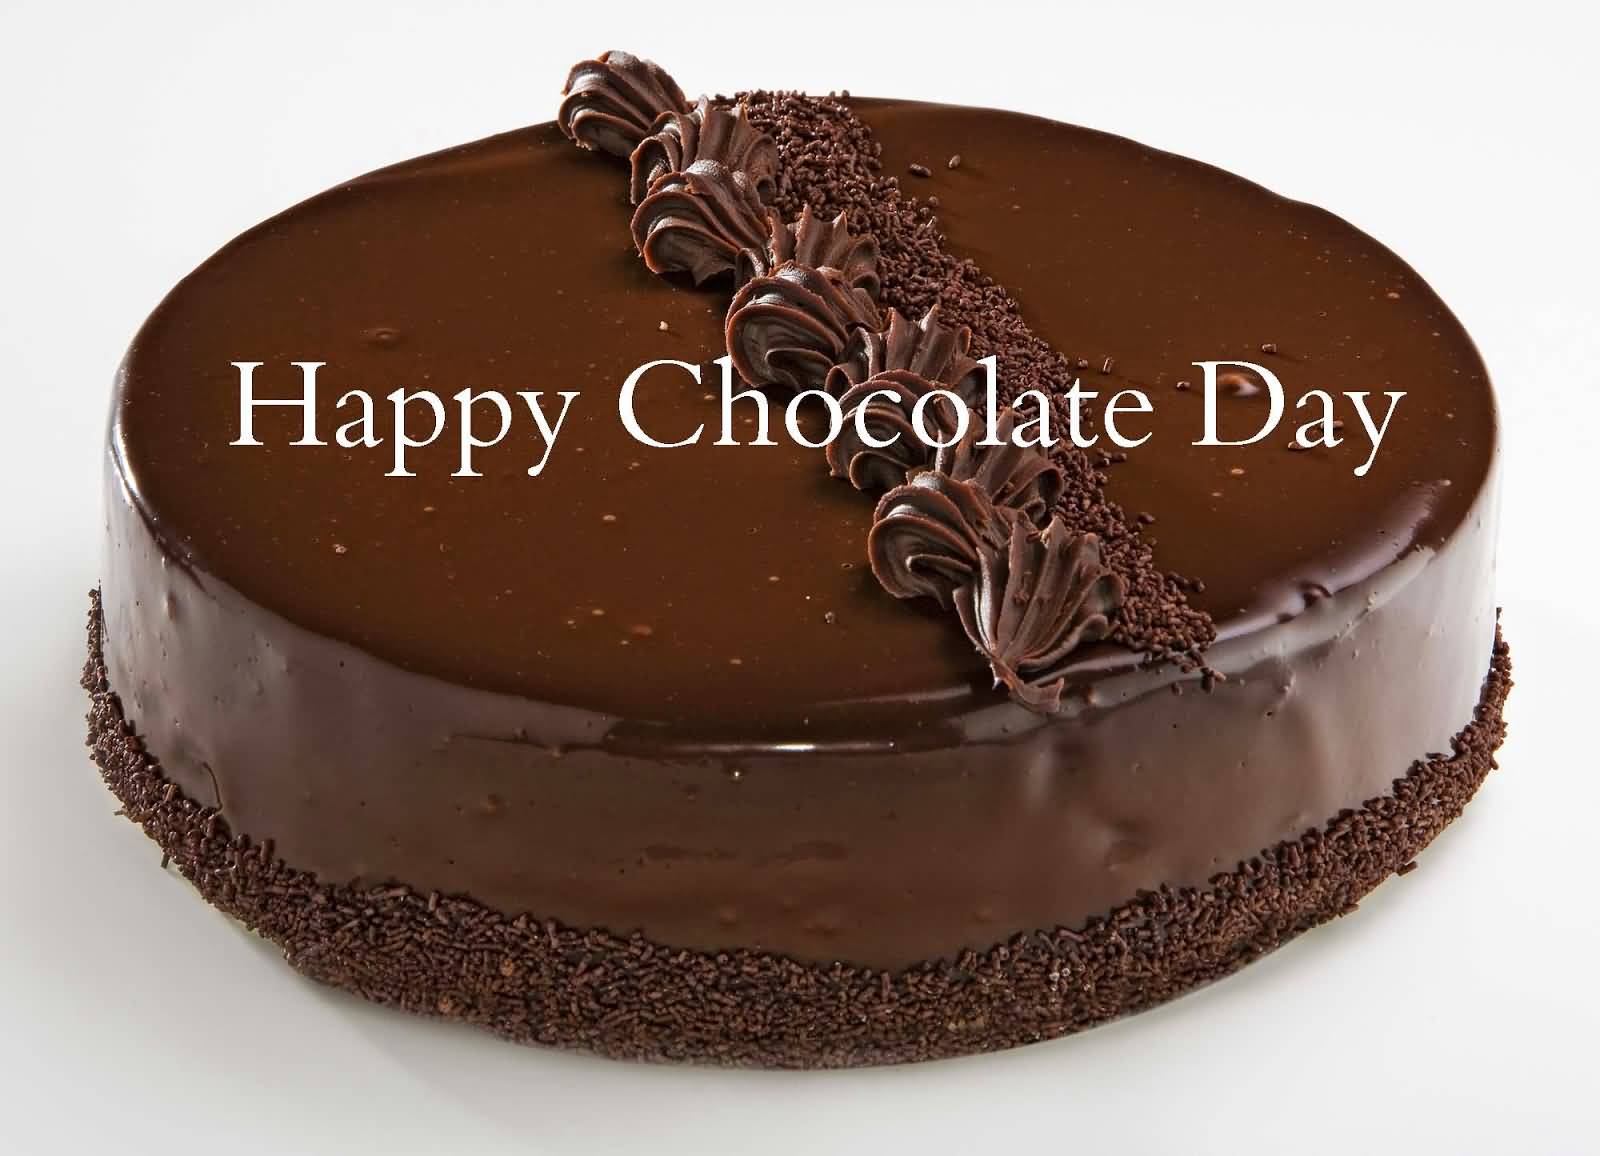 Happy Chocolate Day 2017 Chocolate Cake For You